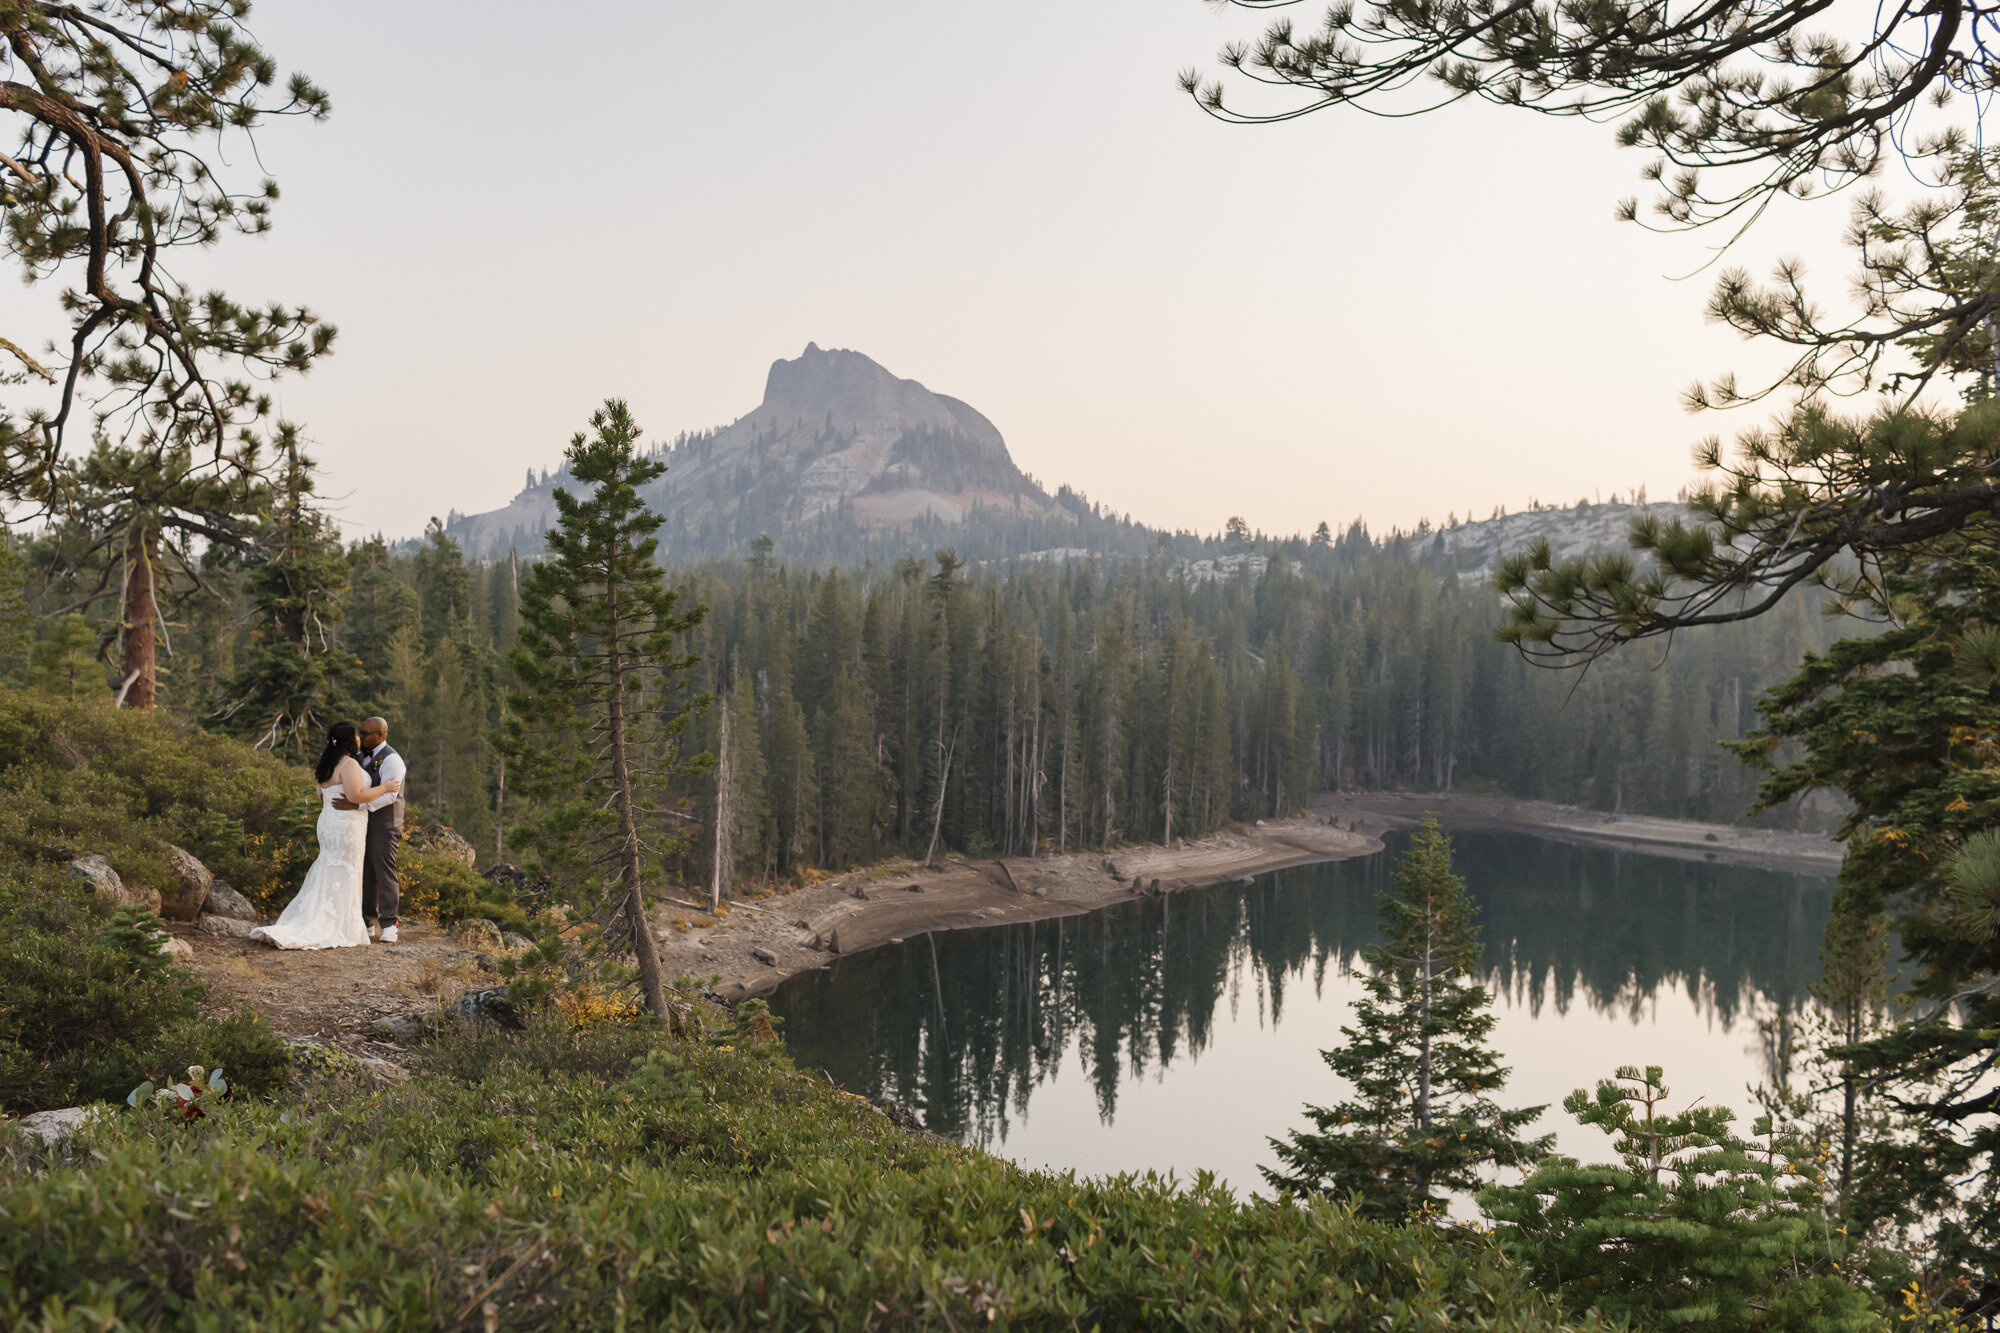 Wedding couple overlook lake and mountain peak in the Tahoe forest